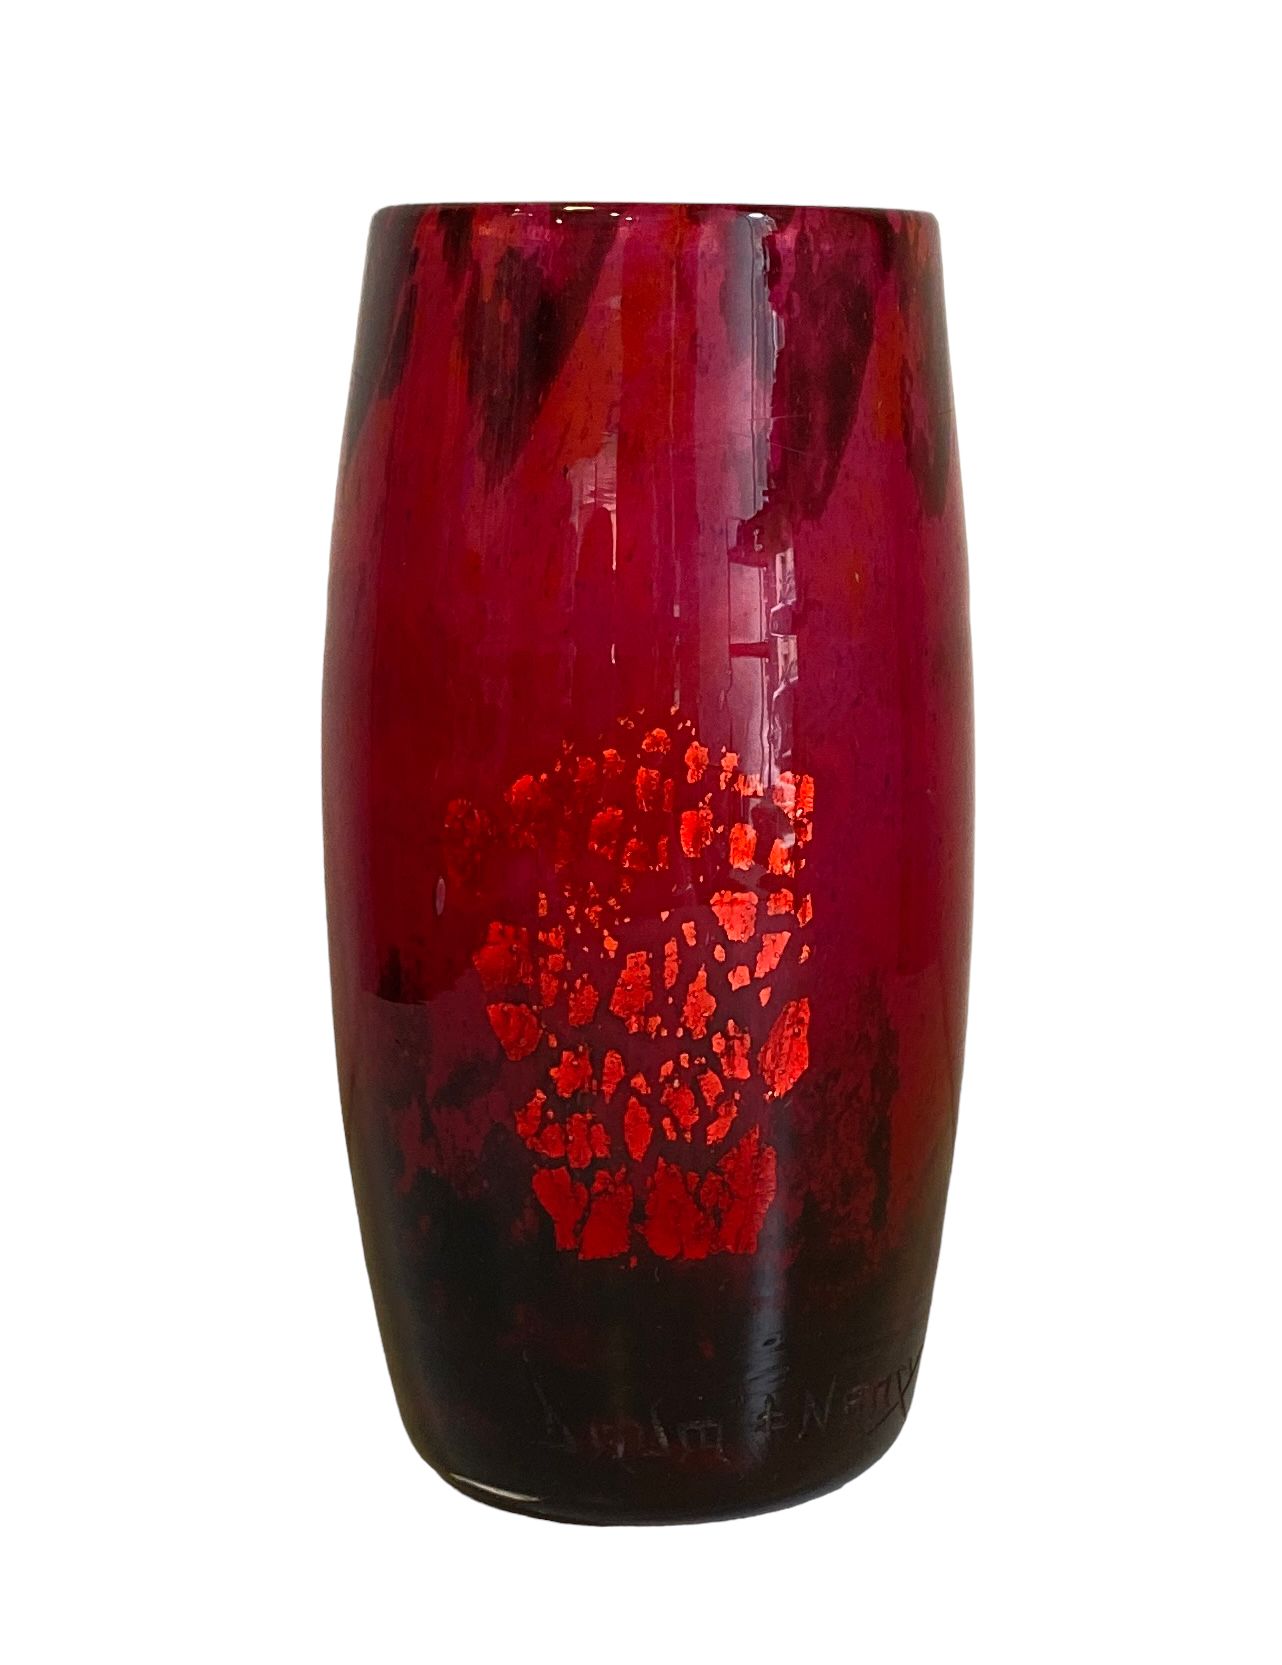 Null Daum Nancy
A marbled glass vase in shades of pink, red and purple enhanced &hellip;